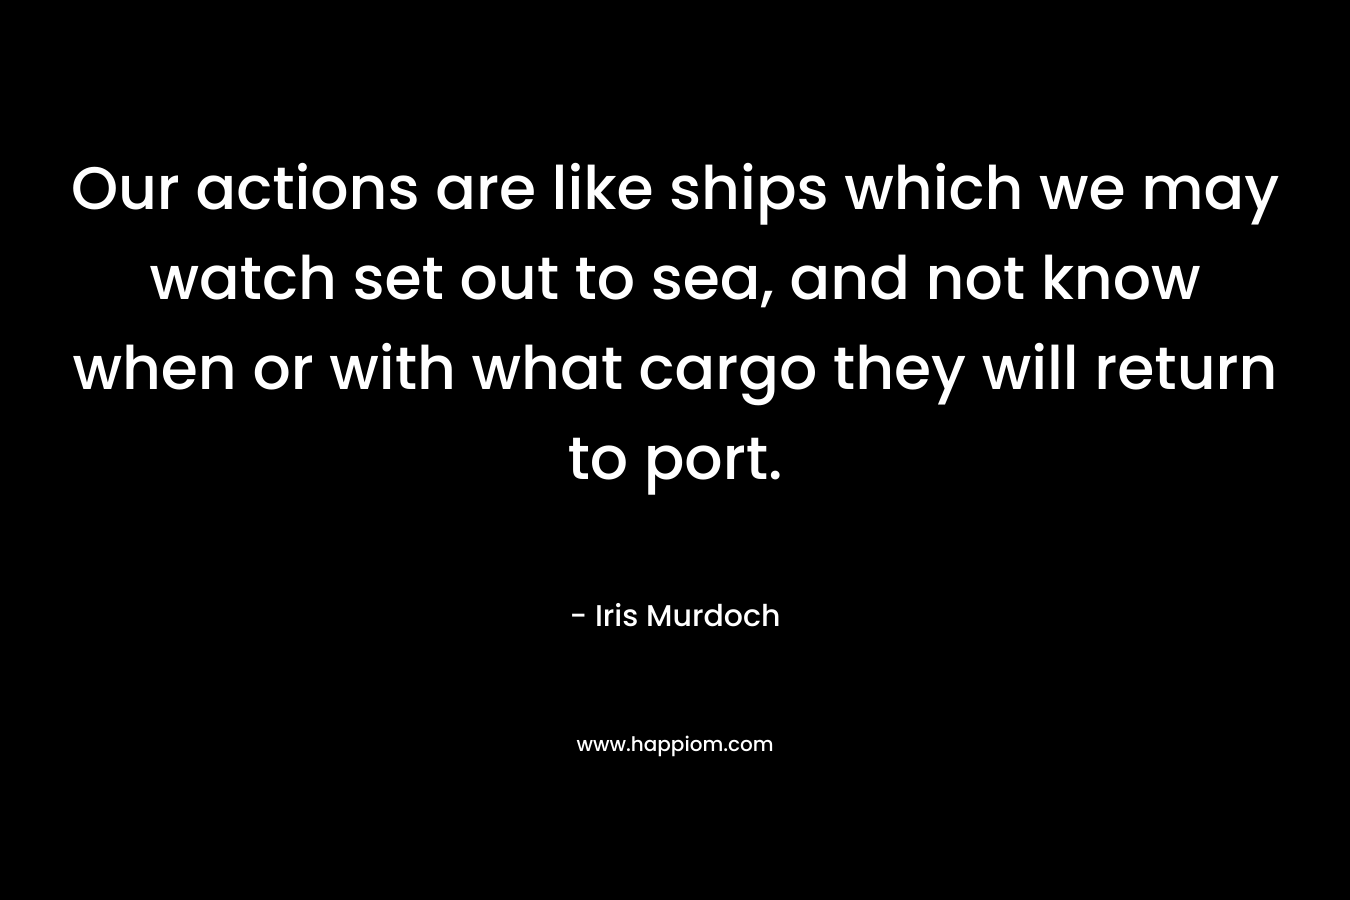 Our actions are like ships which we may watch set out to sea, and not know when or with what cargo they will return to port.